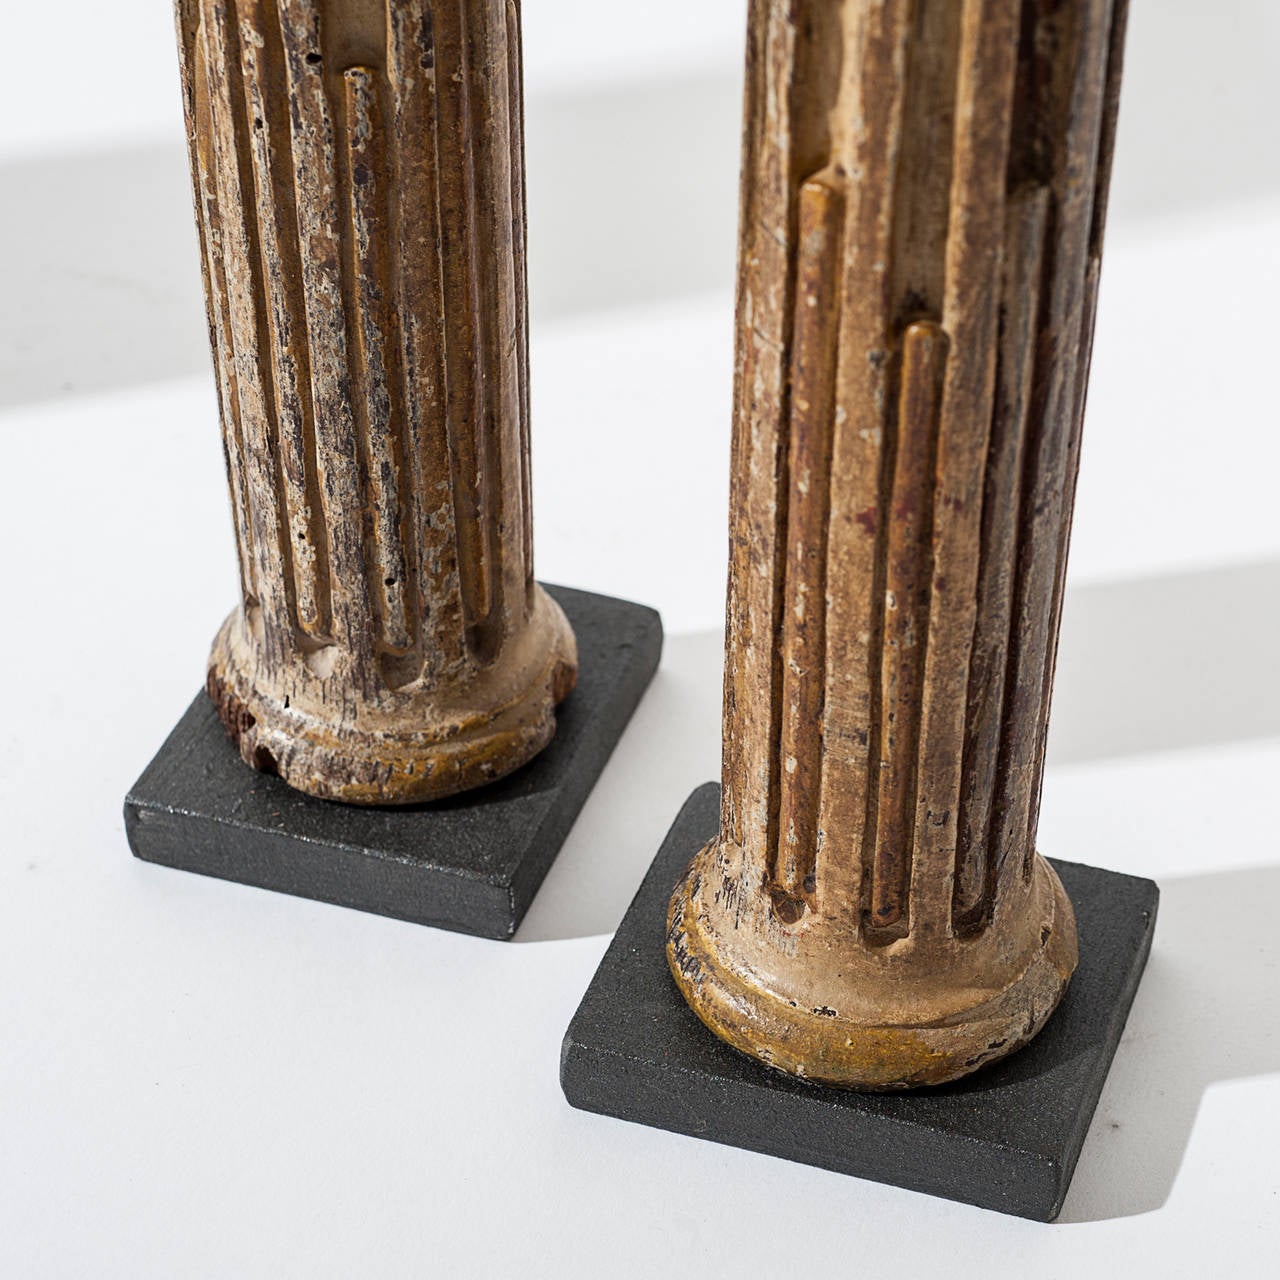 Four small Doric columns, made of painted wood on a base of black stone, retains some of its original colors. 17th century Spain